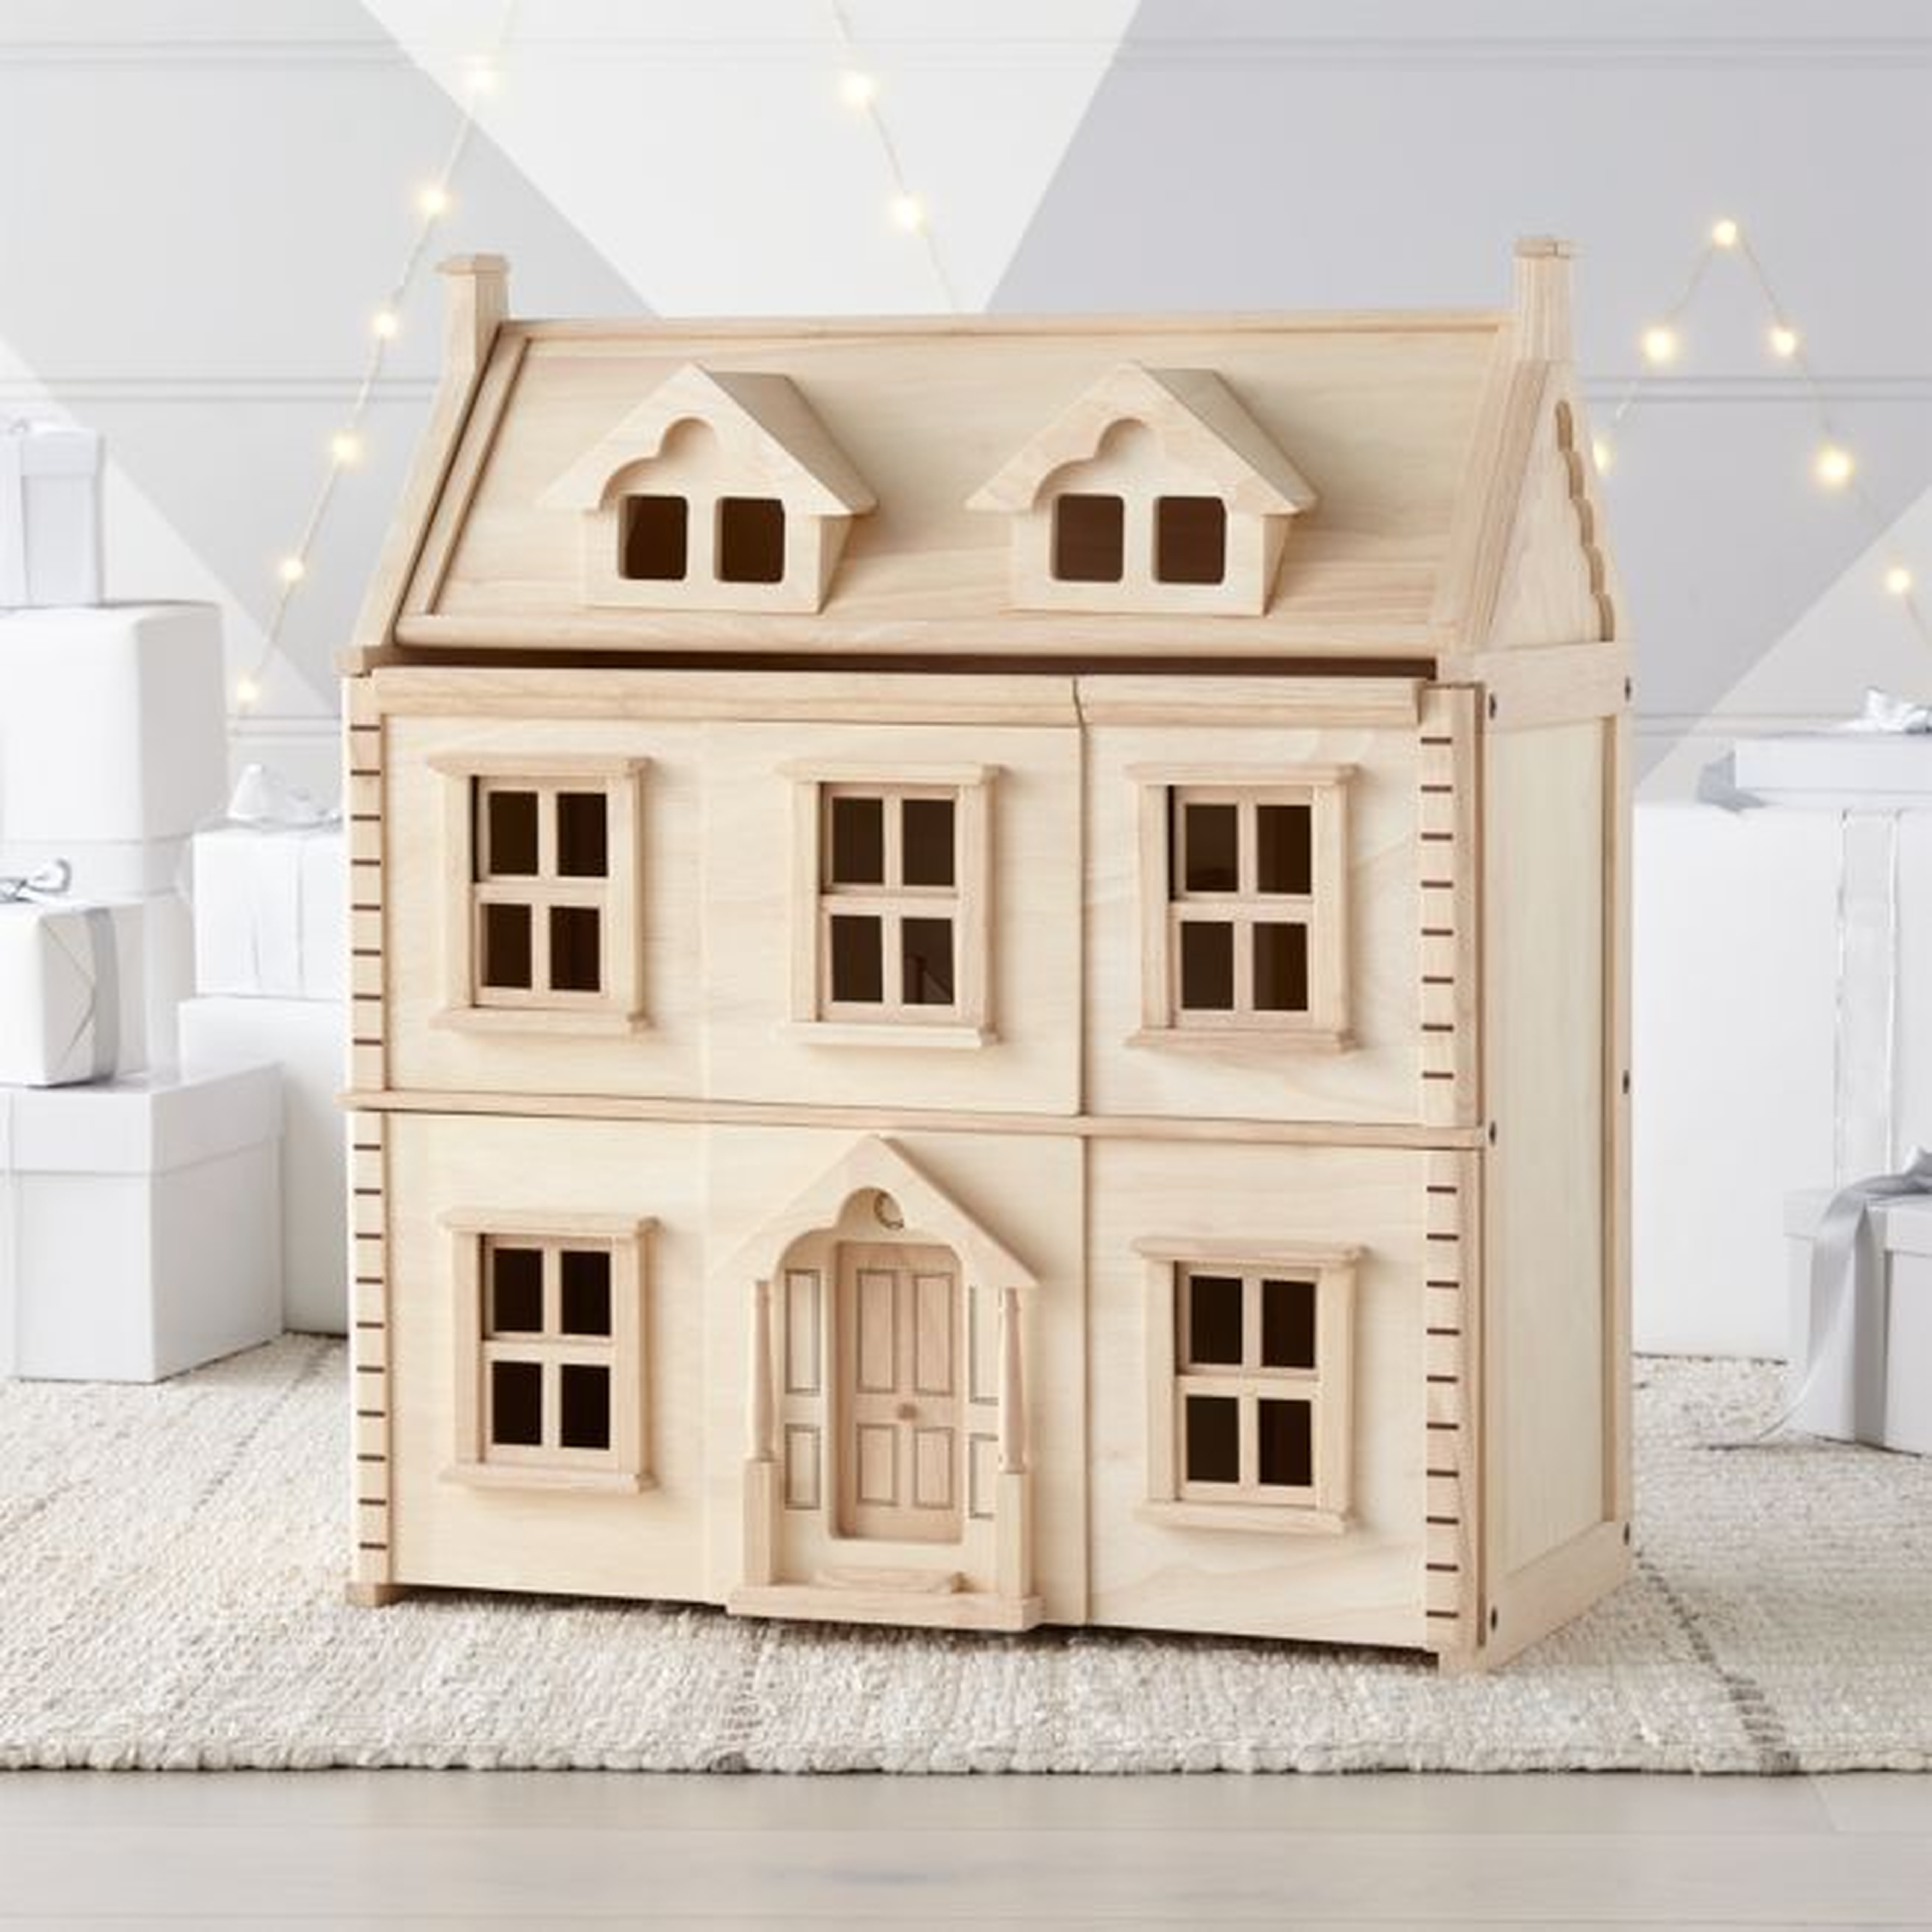 Plan Toys Victorian Dollhouse - Crate and Barrel